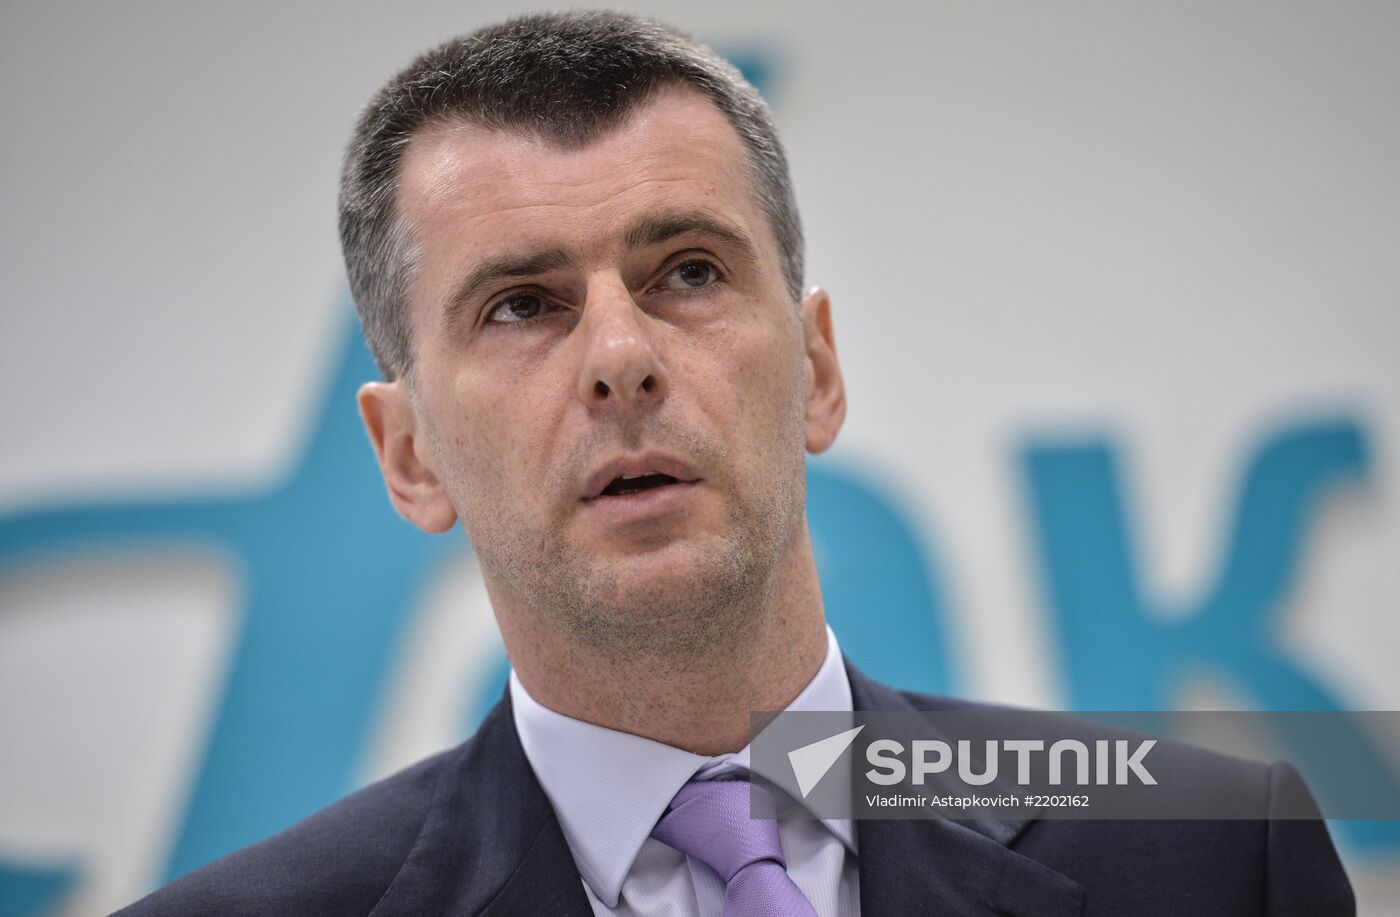 Mikhail Prokhorov drops out of Moscow mayoral race